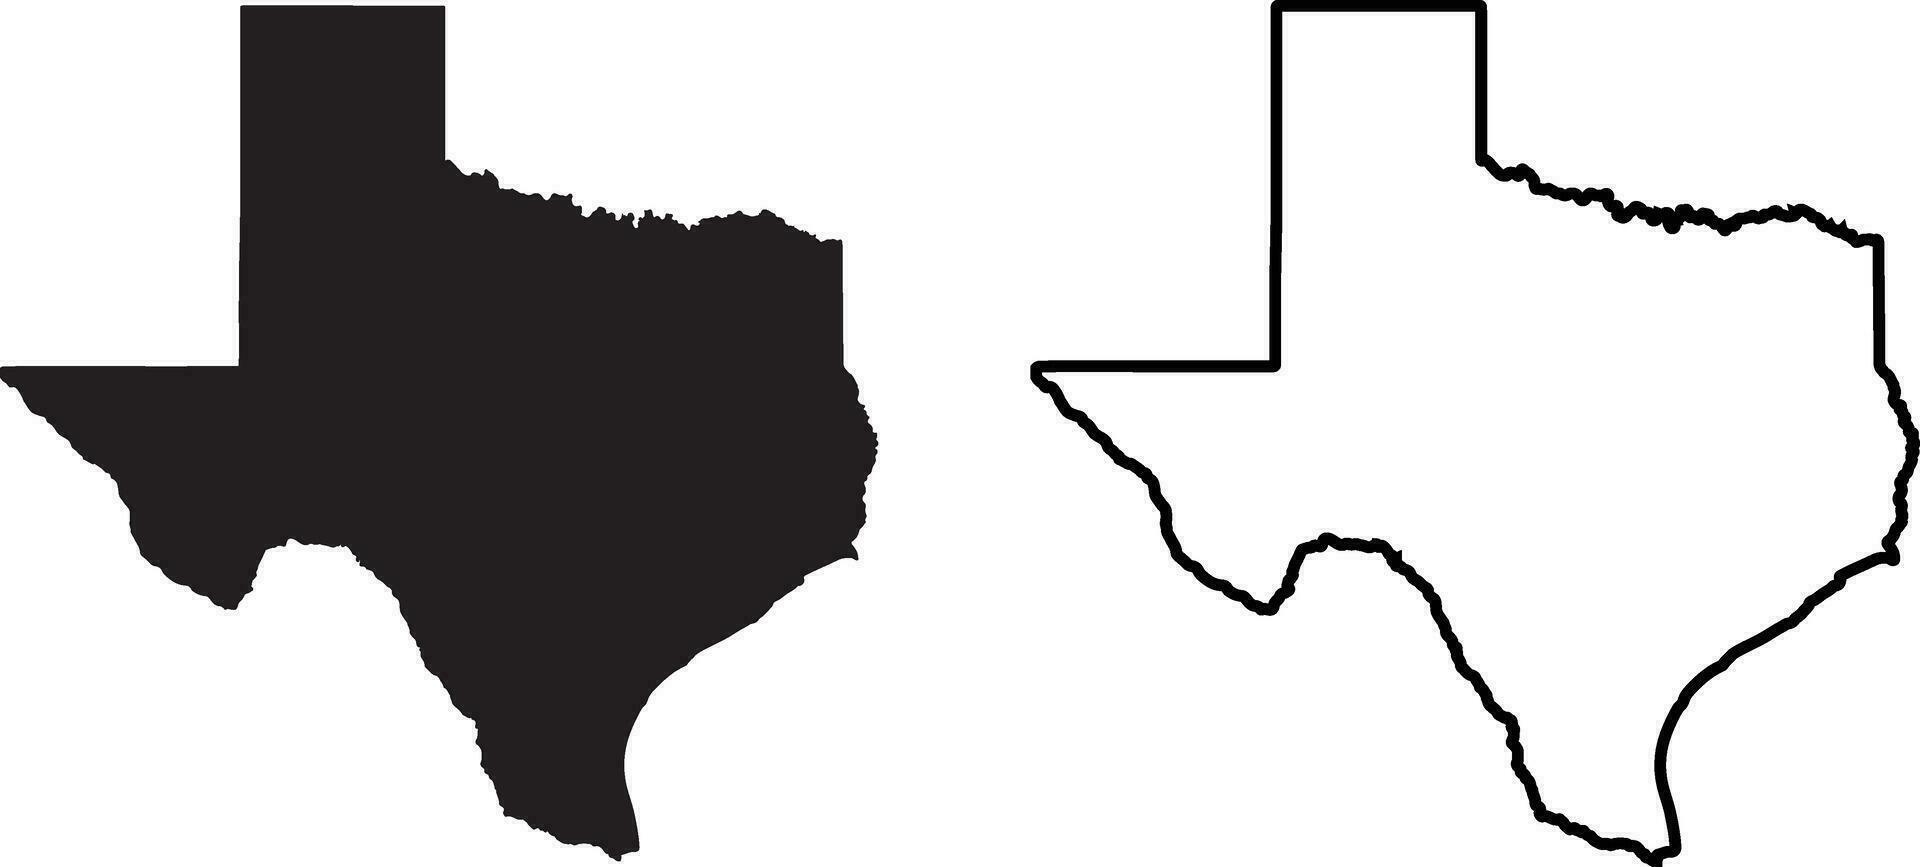 Texas map icon in two styles isolated on white background. Vector illustration